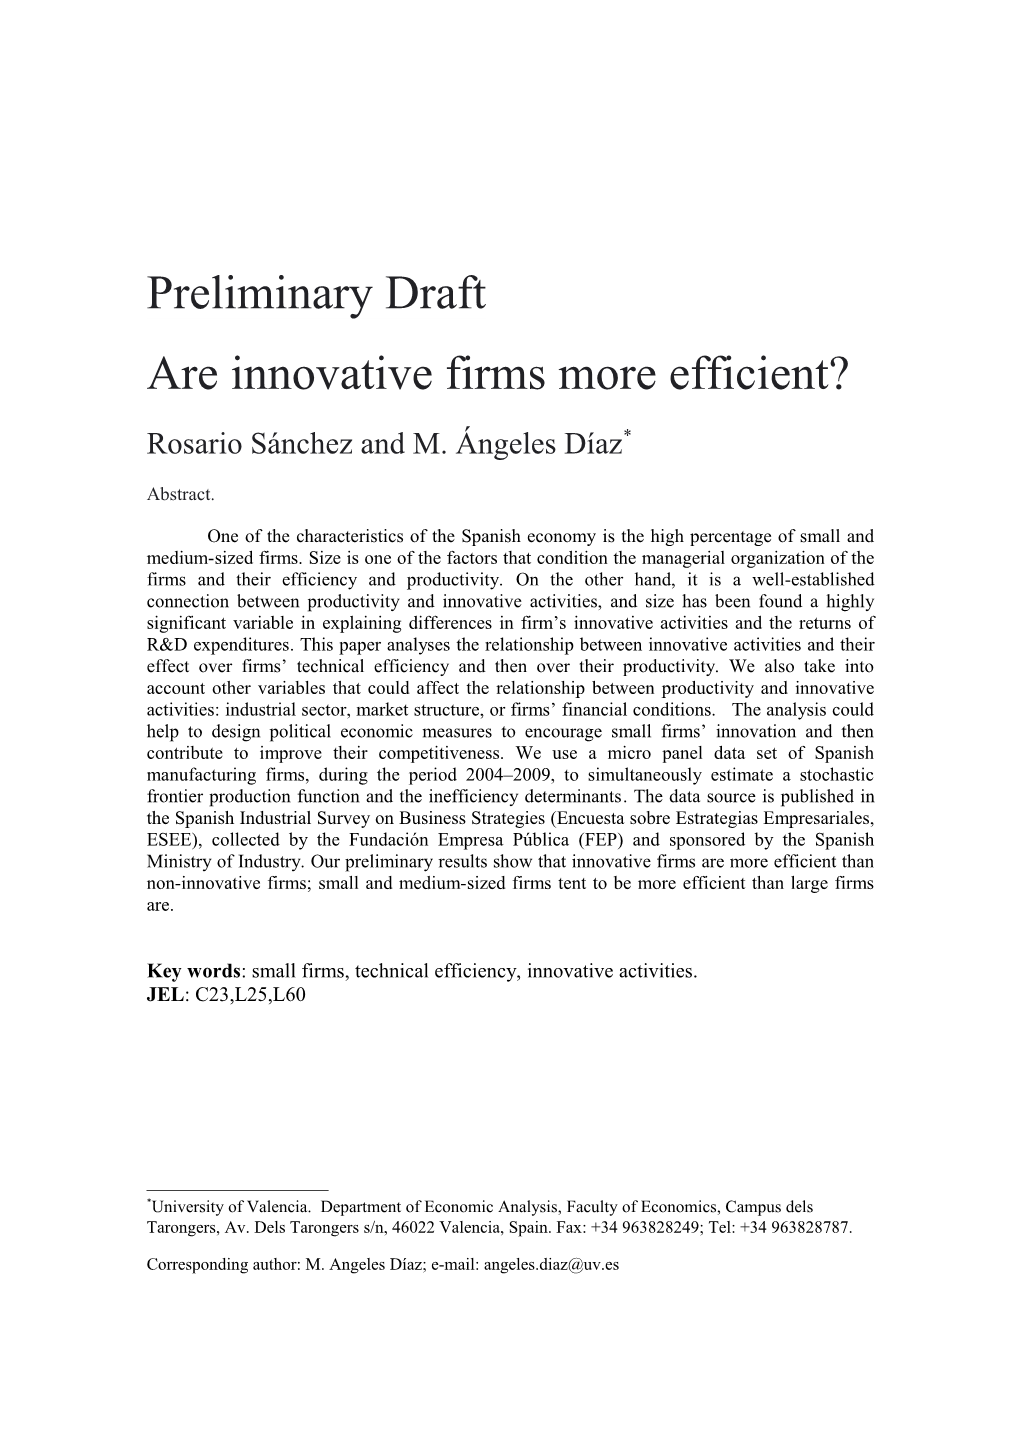 Are Innovative Firms More Efficient?